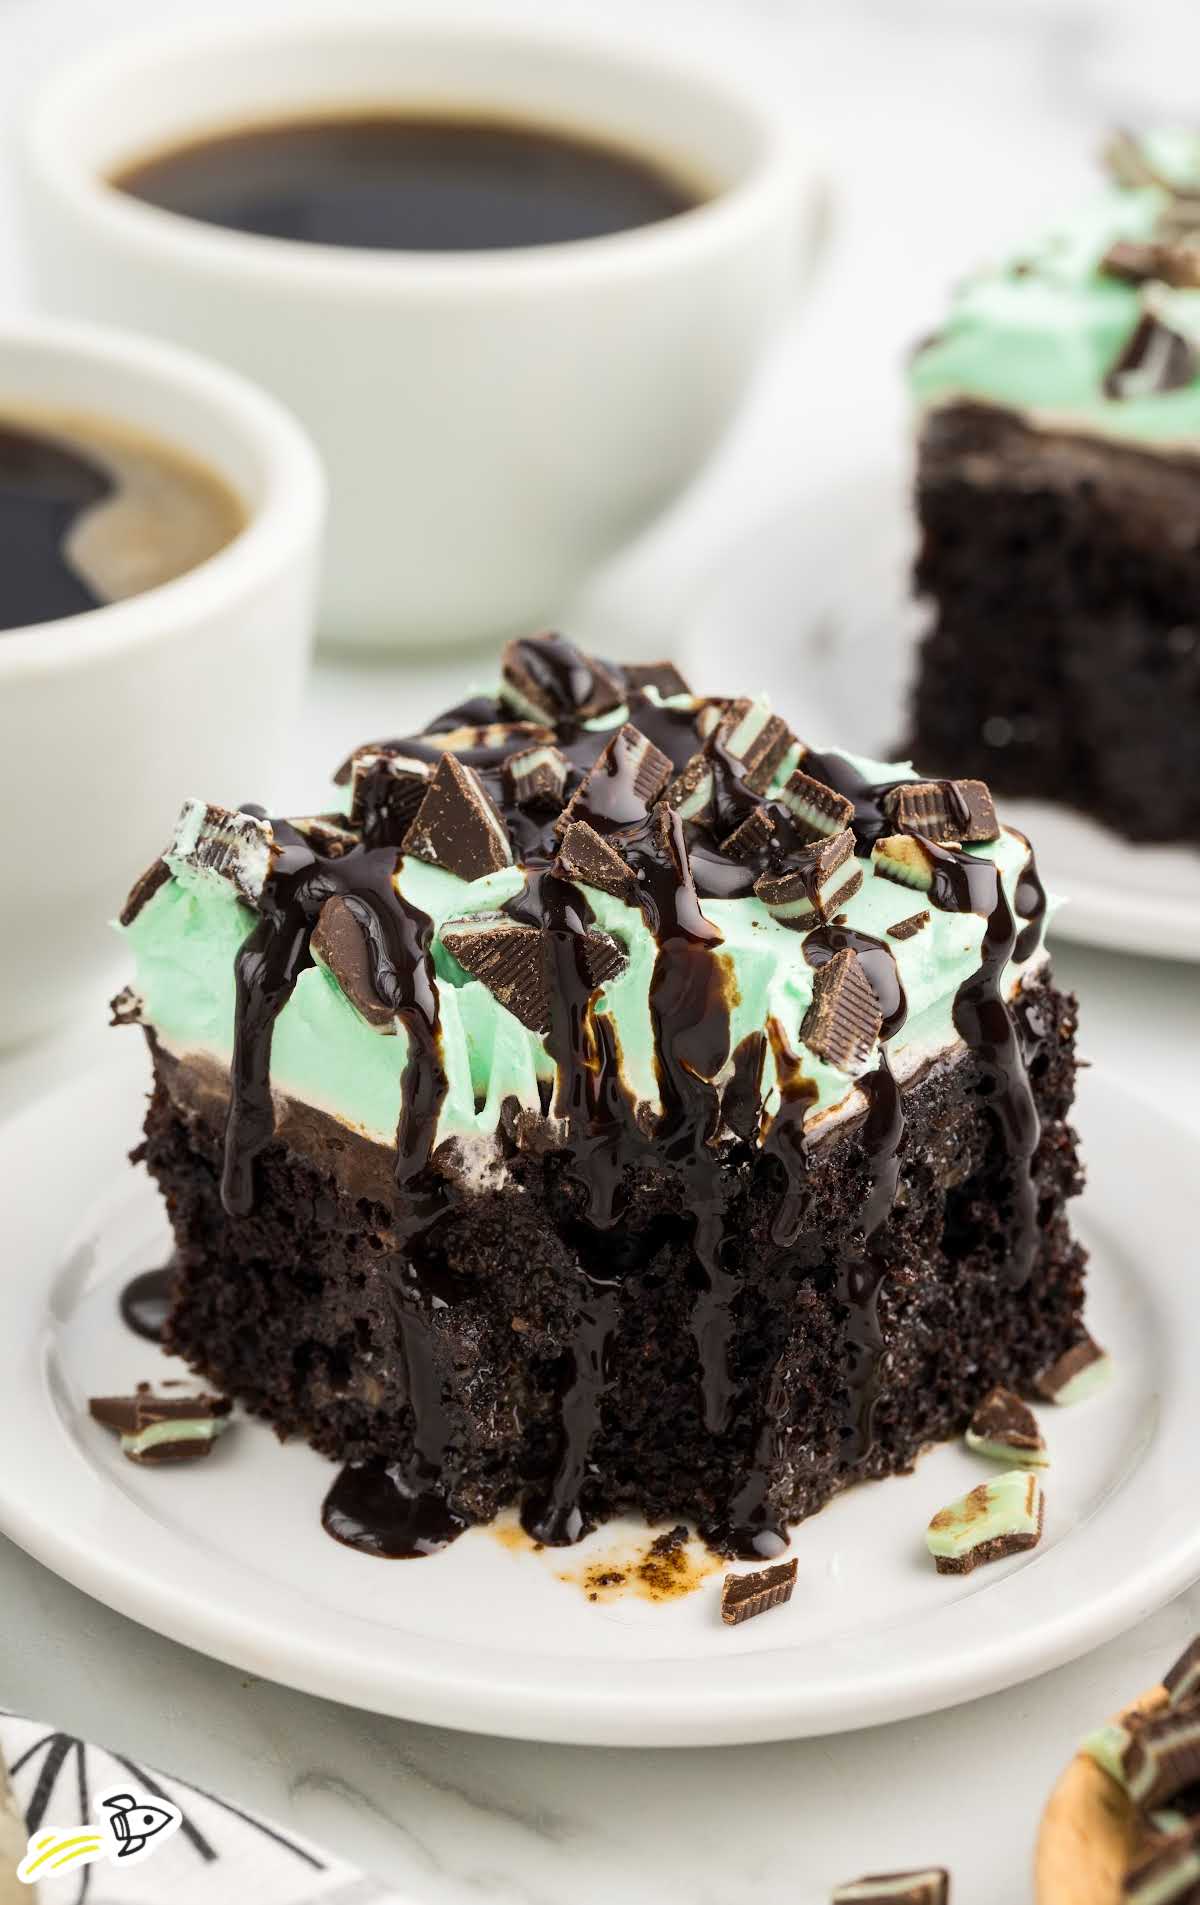 a slice of cake topped with mint chocolate candies and drizzled with chocolate syrup on a plate